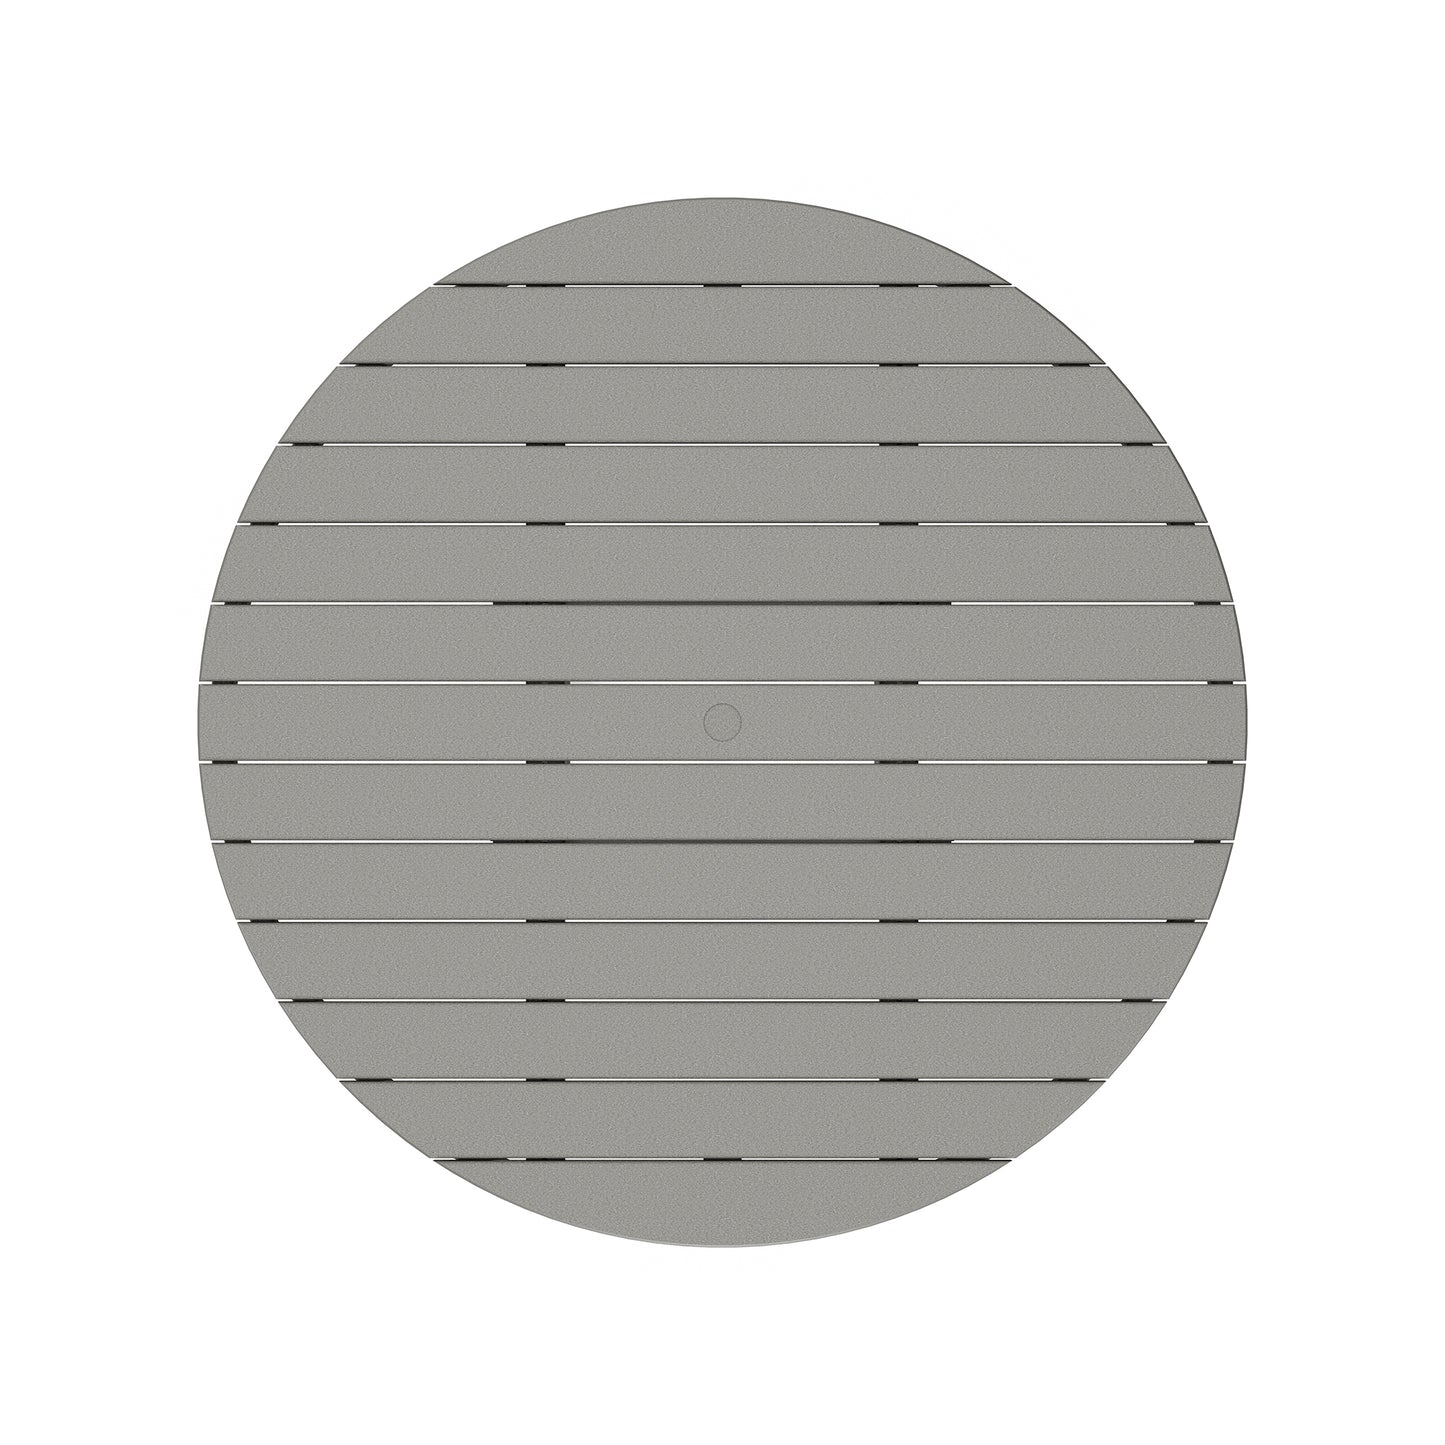 Round, flat, gray POLYWOOD® Outdoor 48" Round Bar Table surface featuring uniformly arranged elongated slots, likely made of metal, with a central circular depression; viewed directly from above.